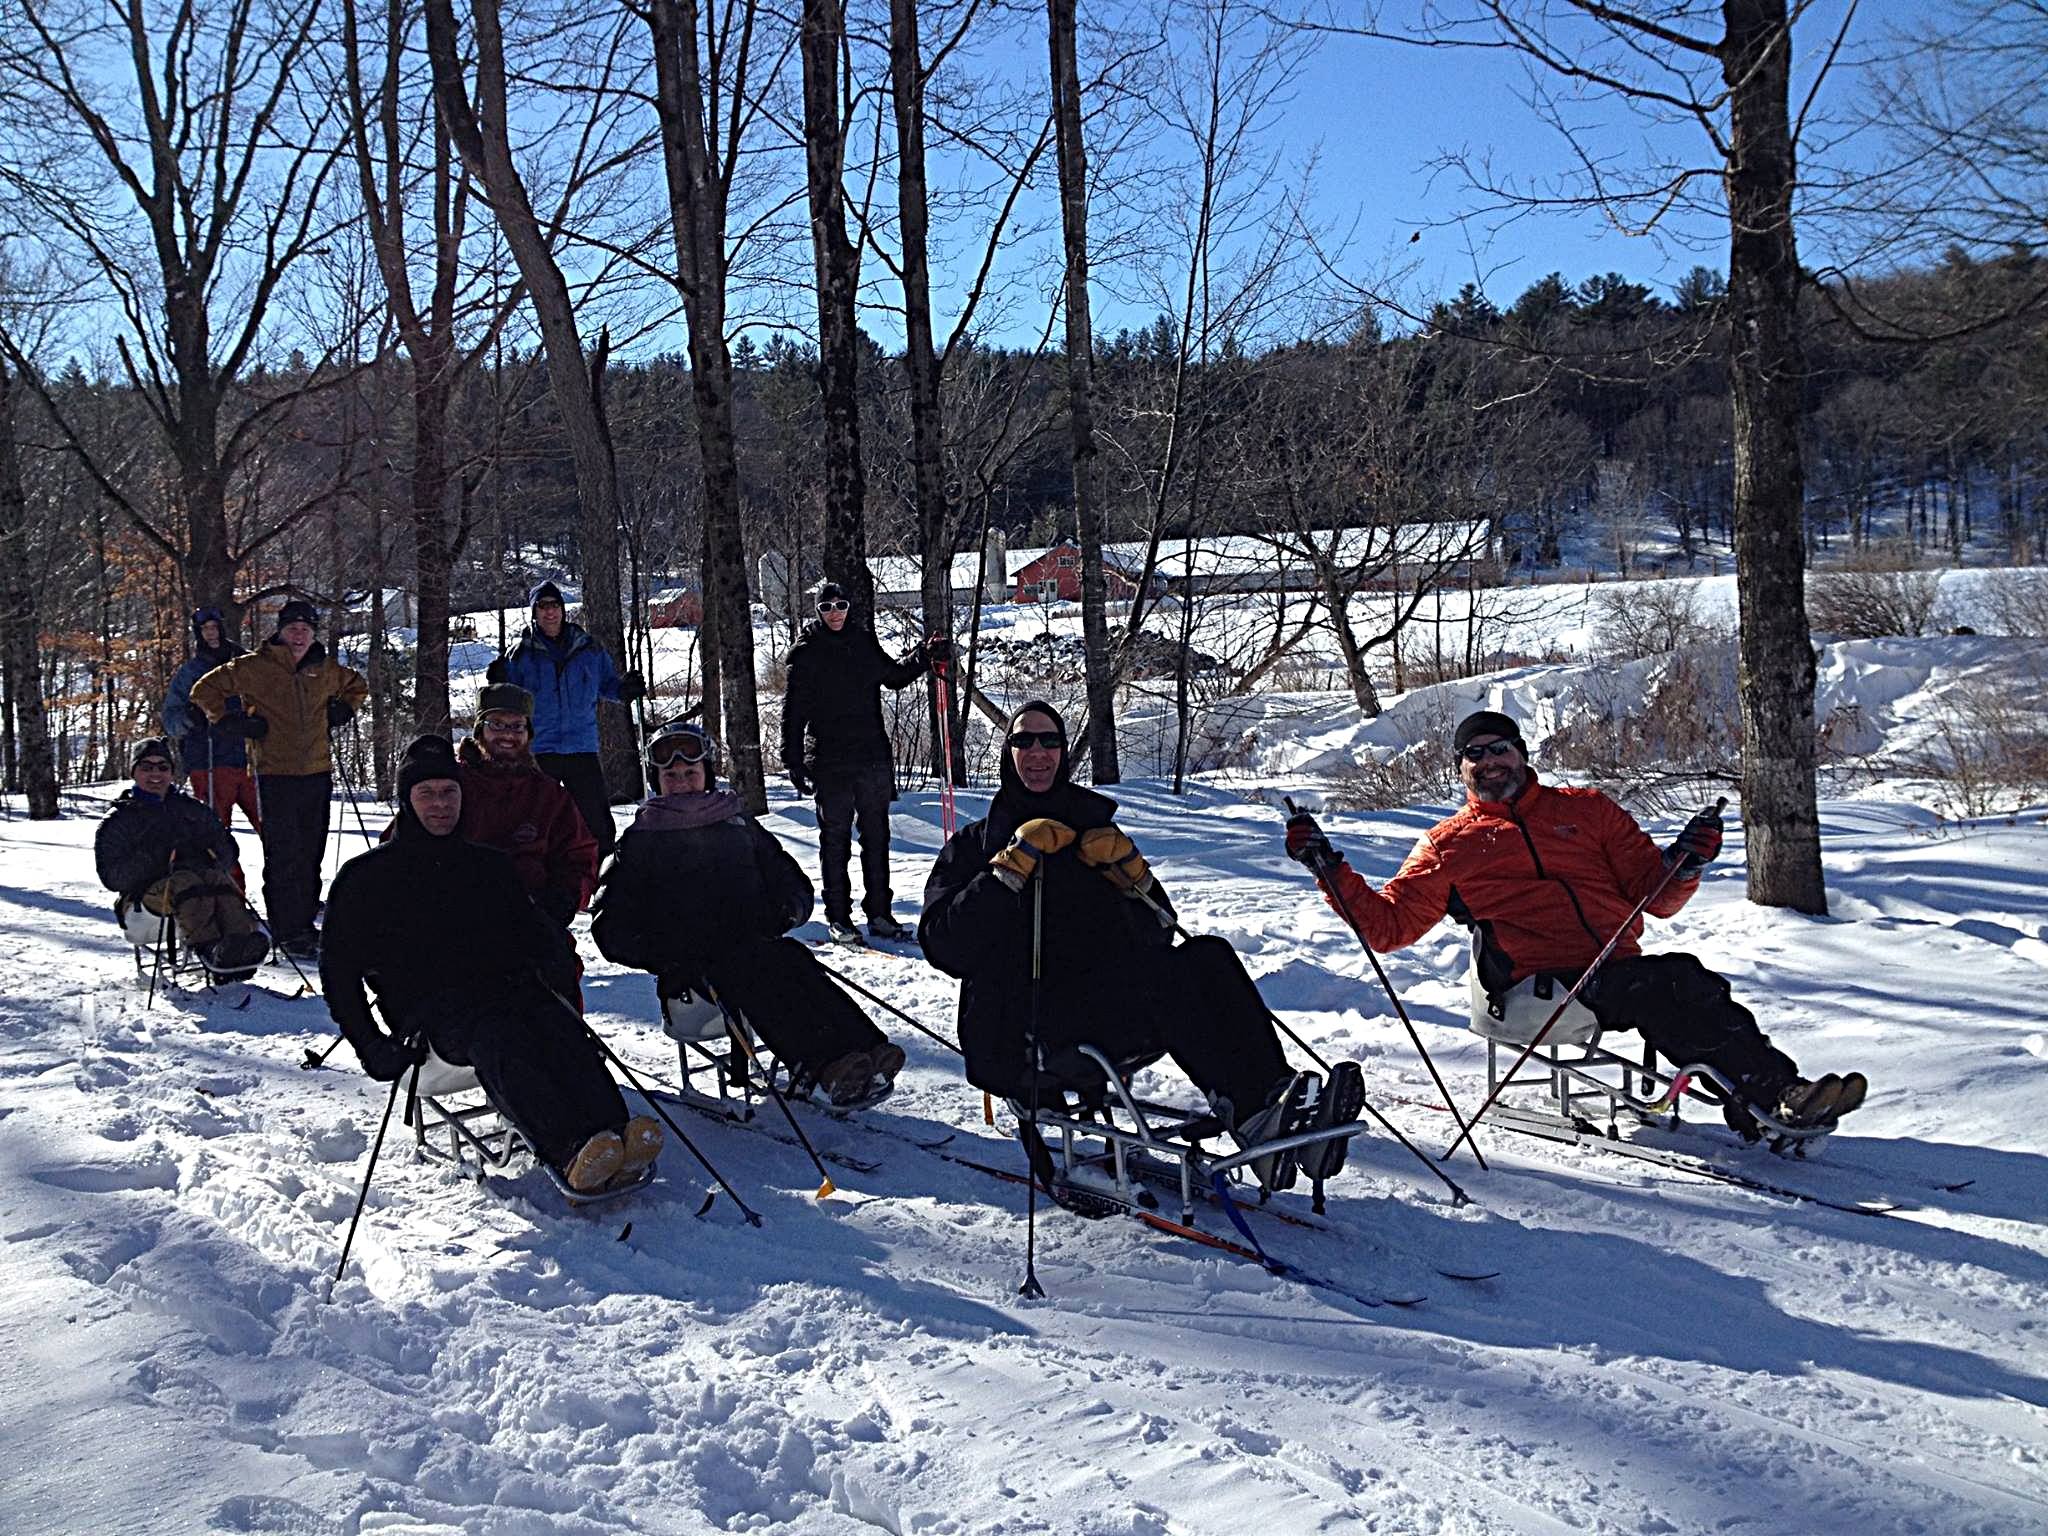 Nordic sit skiiers, including Patrick and Lee, smile on a sunny Vermont winter's day